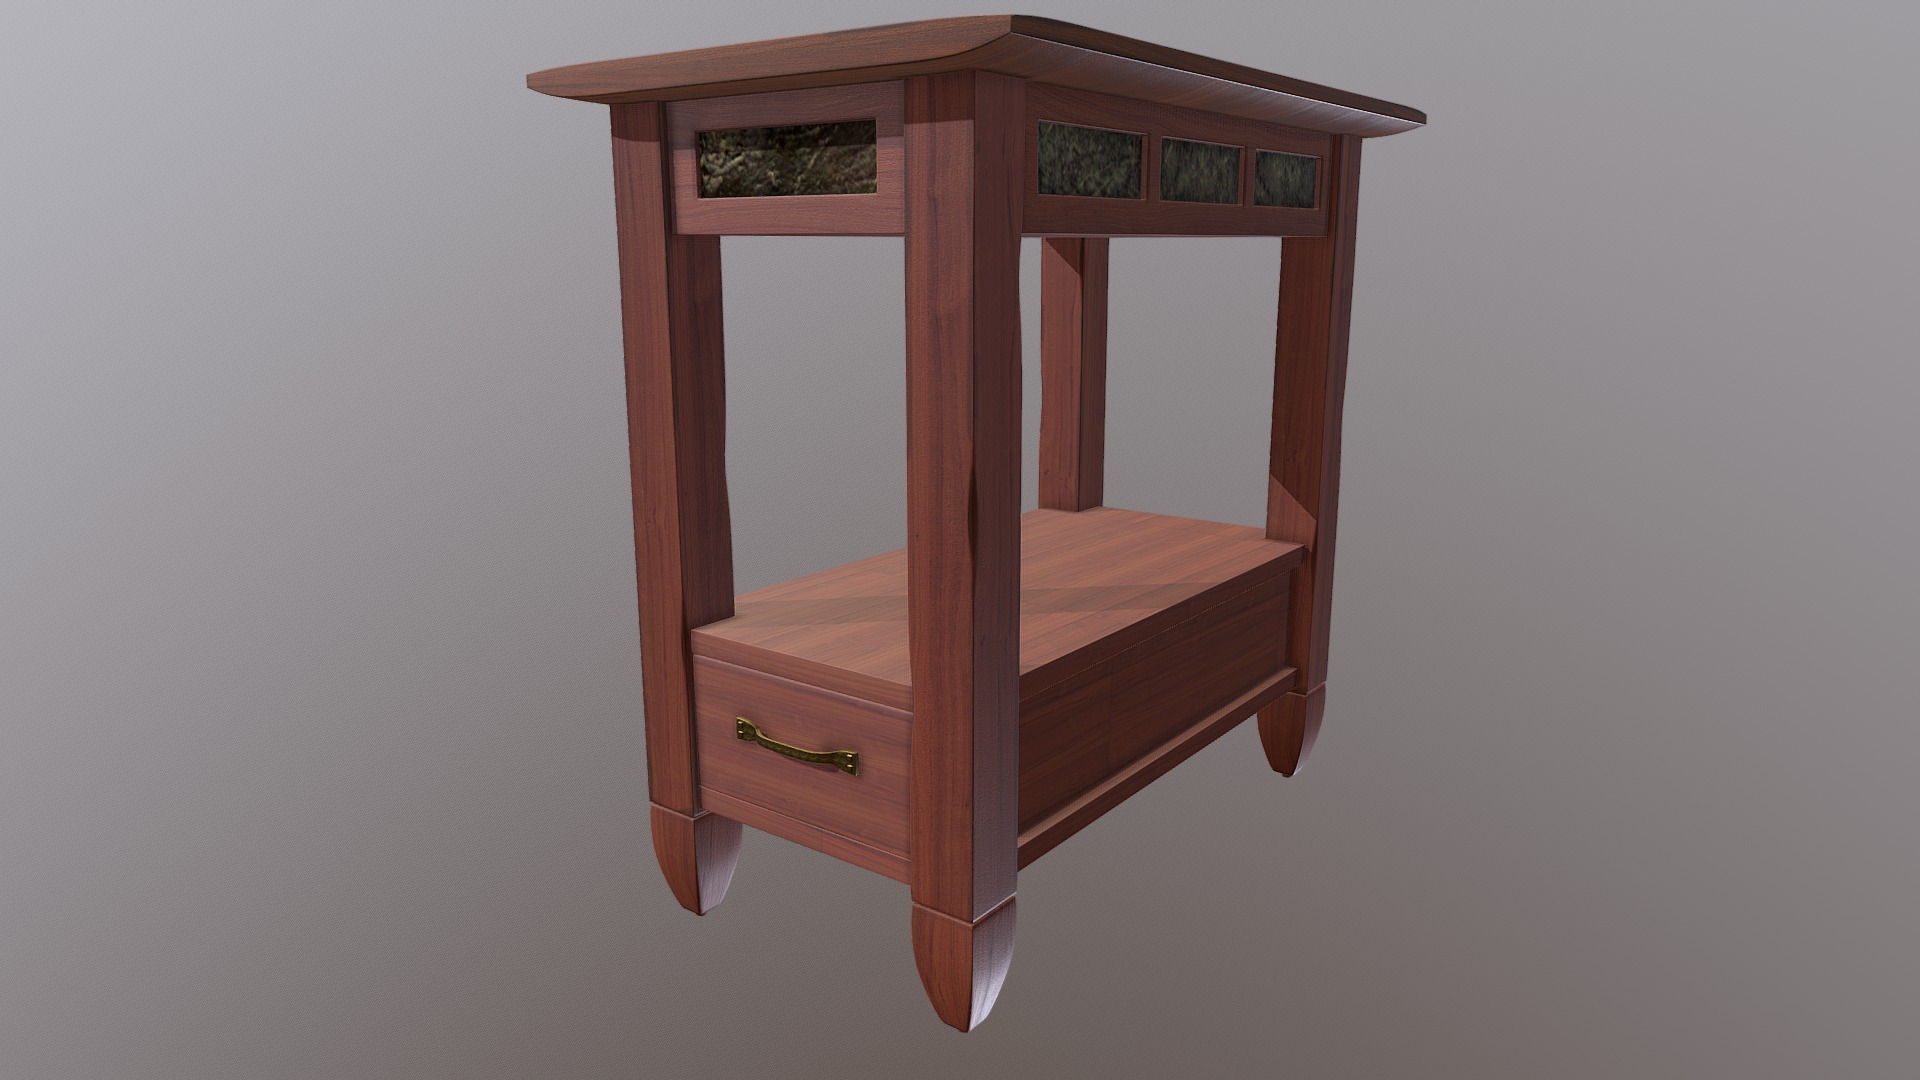 3D model Atkinson End Table - This is a 3D model of the Atkinson End Table. The 3D model is about a wooden toy house.